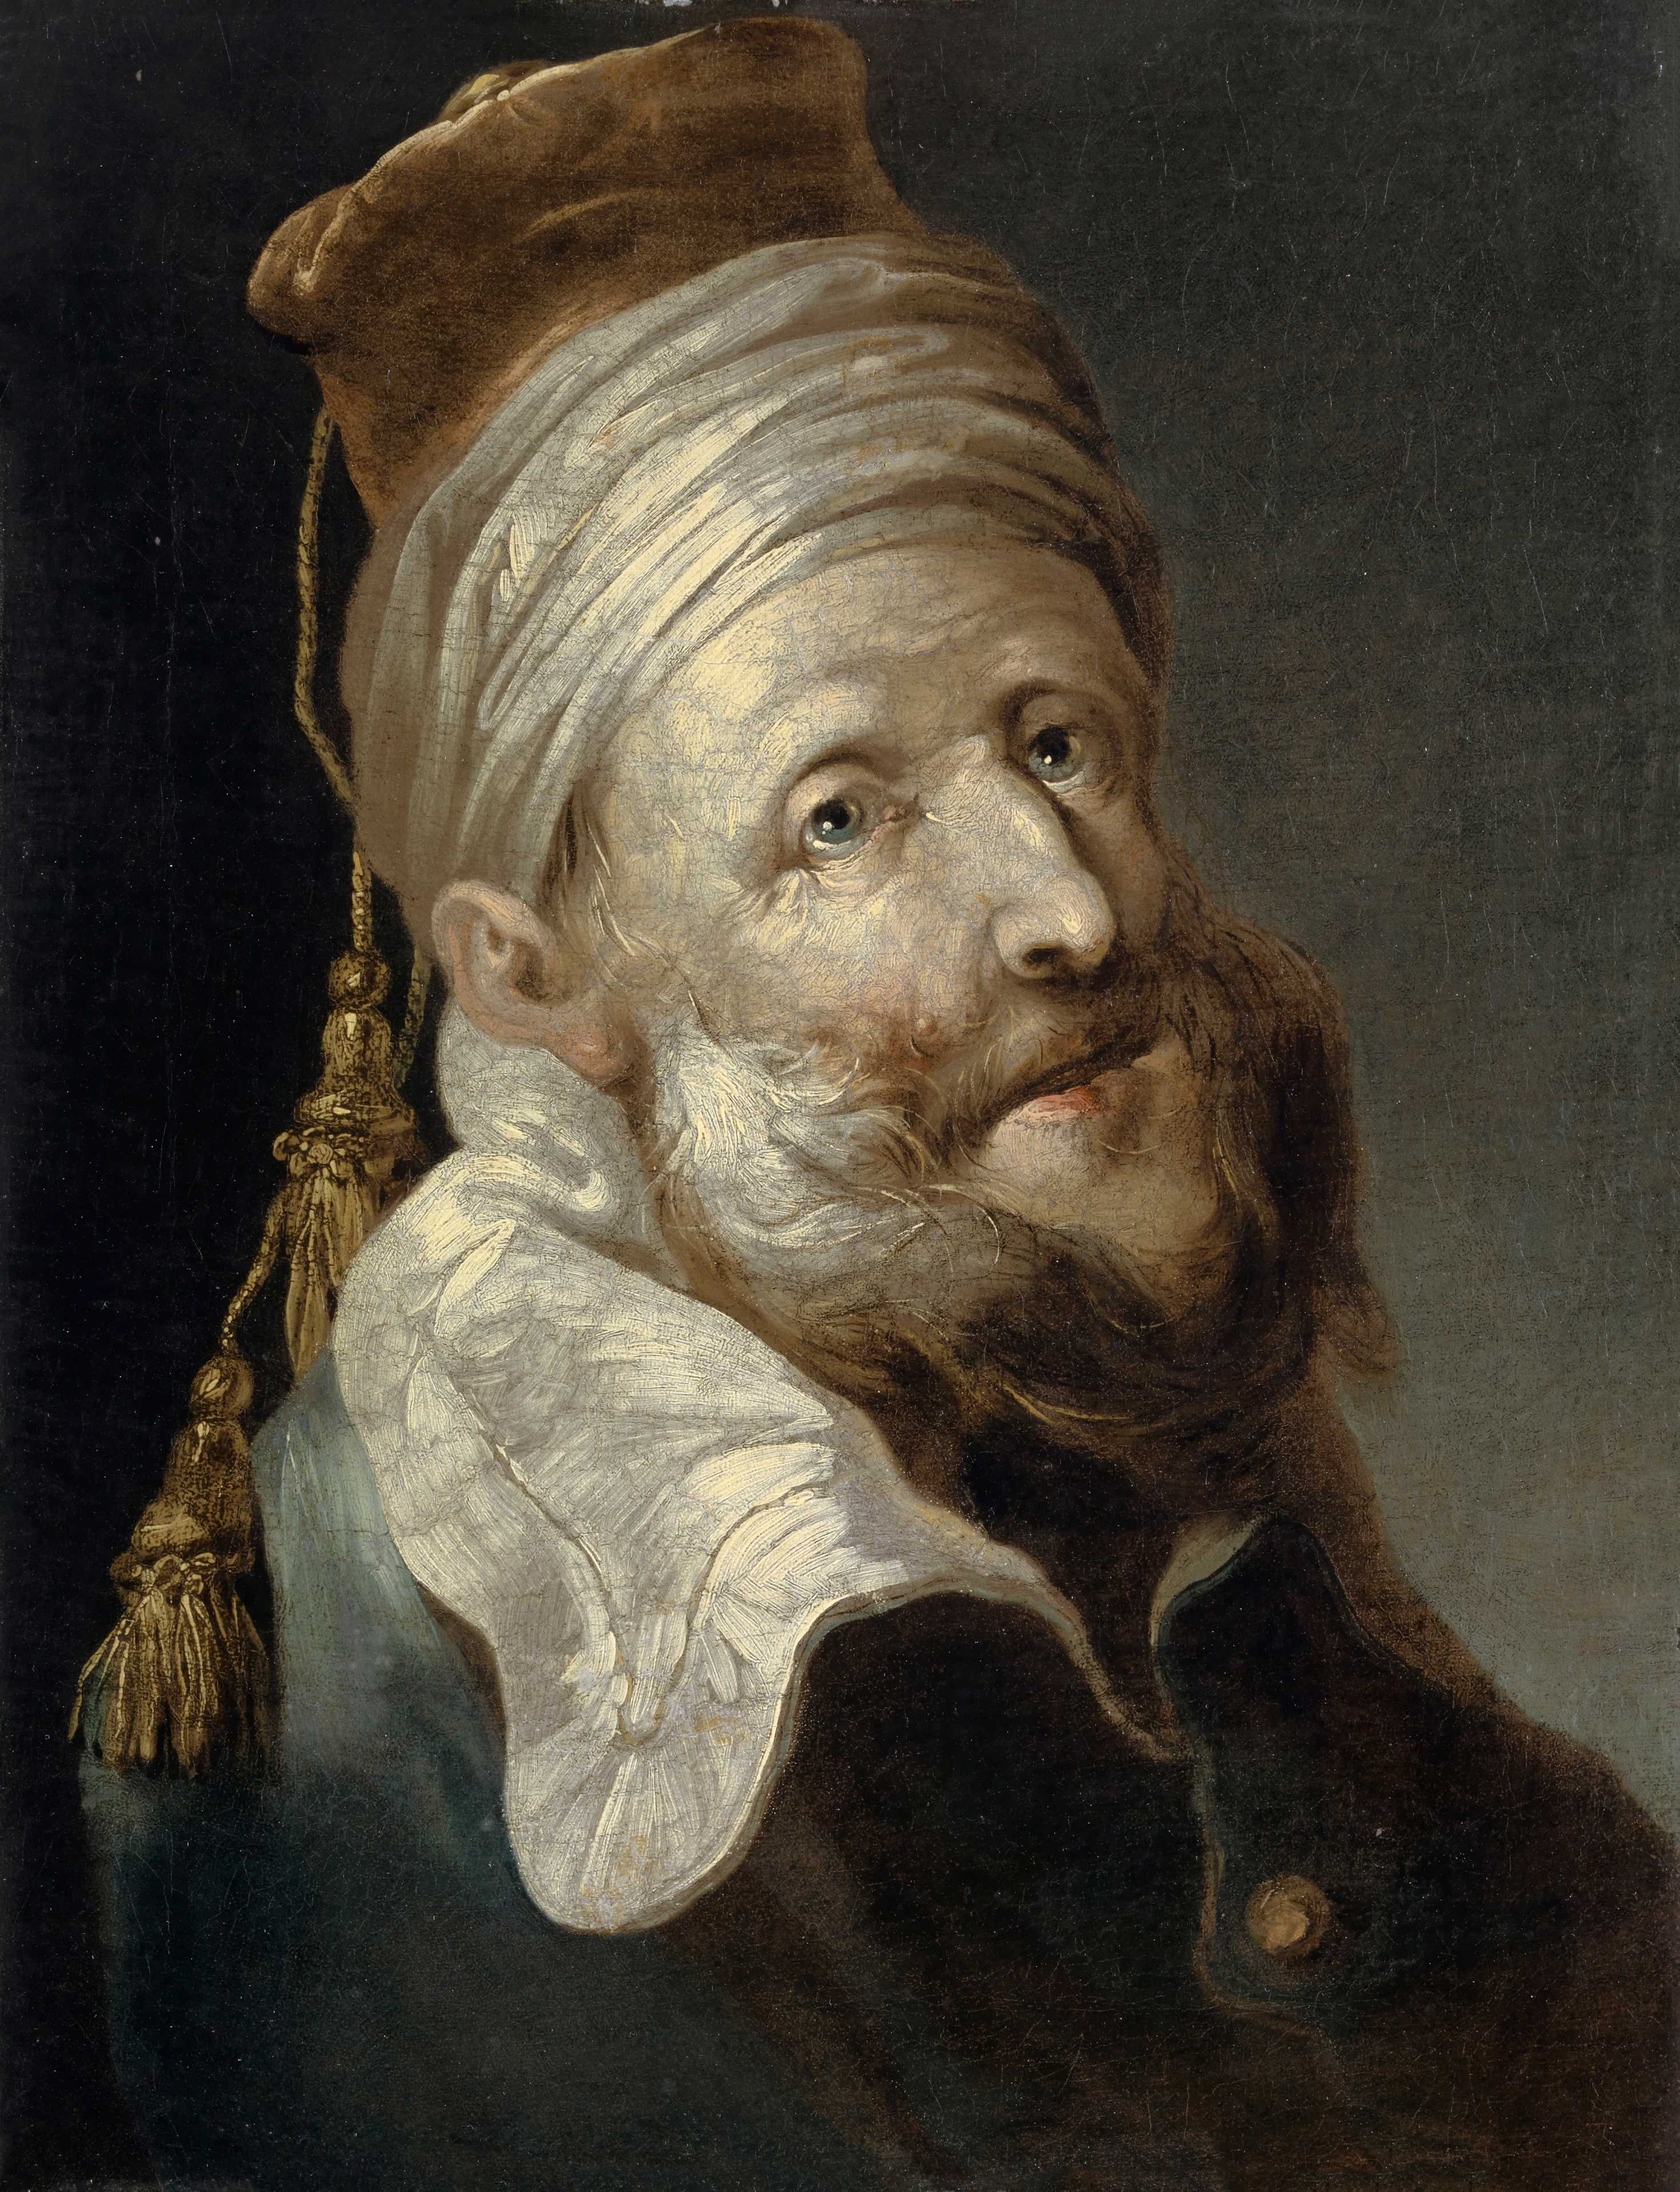 Find out more about Tiberius Dominikus Wocher - Oriental with Turban and Fez with Two Tassels